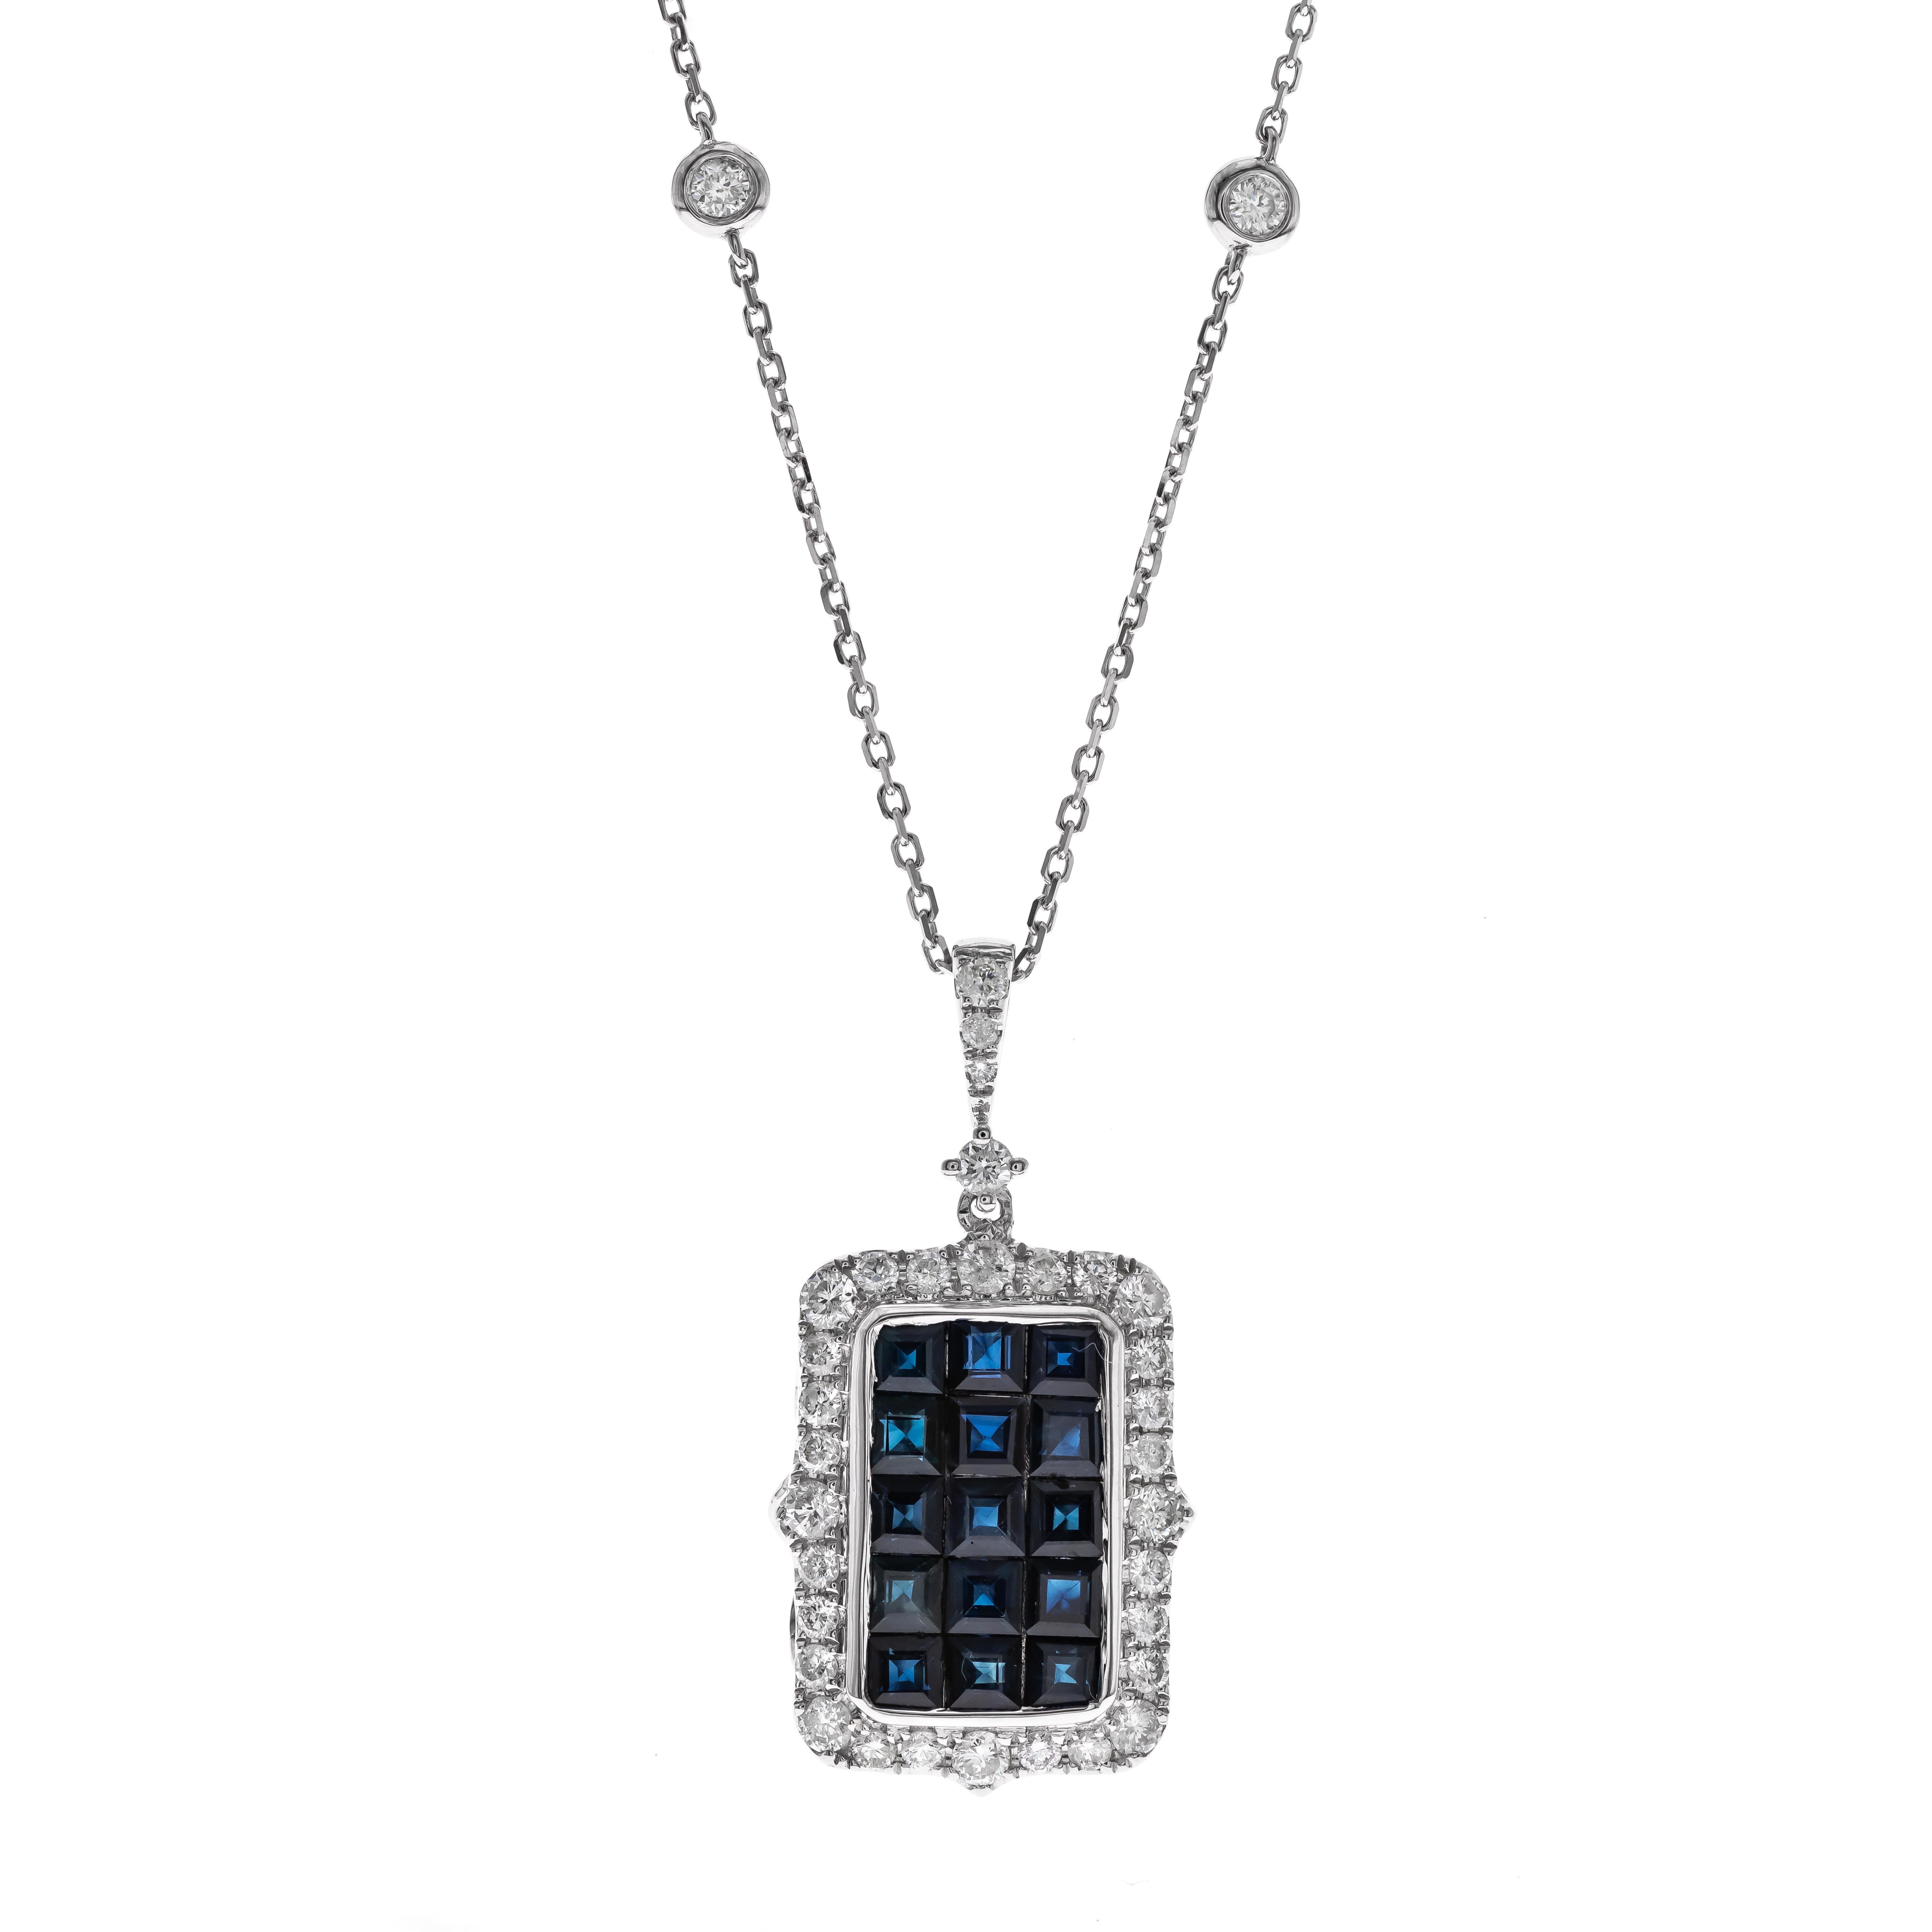 Decorate yourself in elegance with this Pendant is crafted from 14-karat White Gold by Gin & Grace. This Pendant is made up of 2.5 mm Square-cut Blue Sapphire (15 pcs) 2.25 carat and Round-cut White Diamond (34 Pcs) 0.63 Carat. This Pendant is